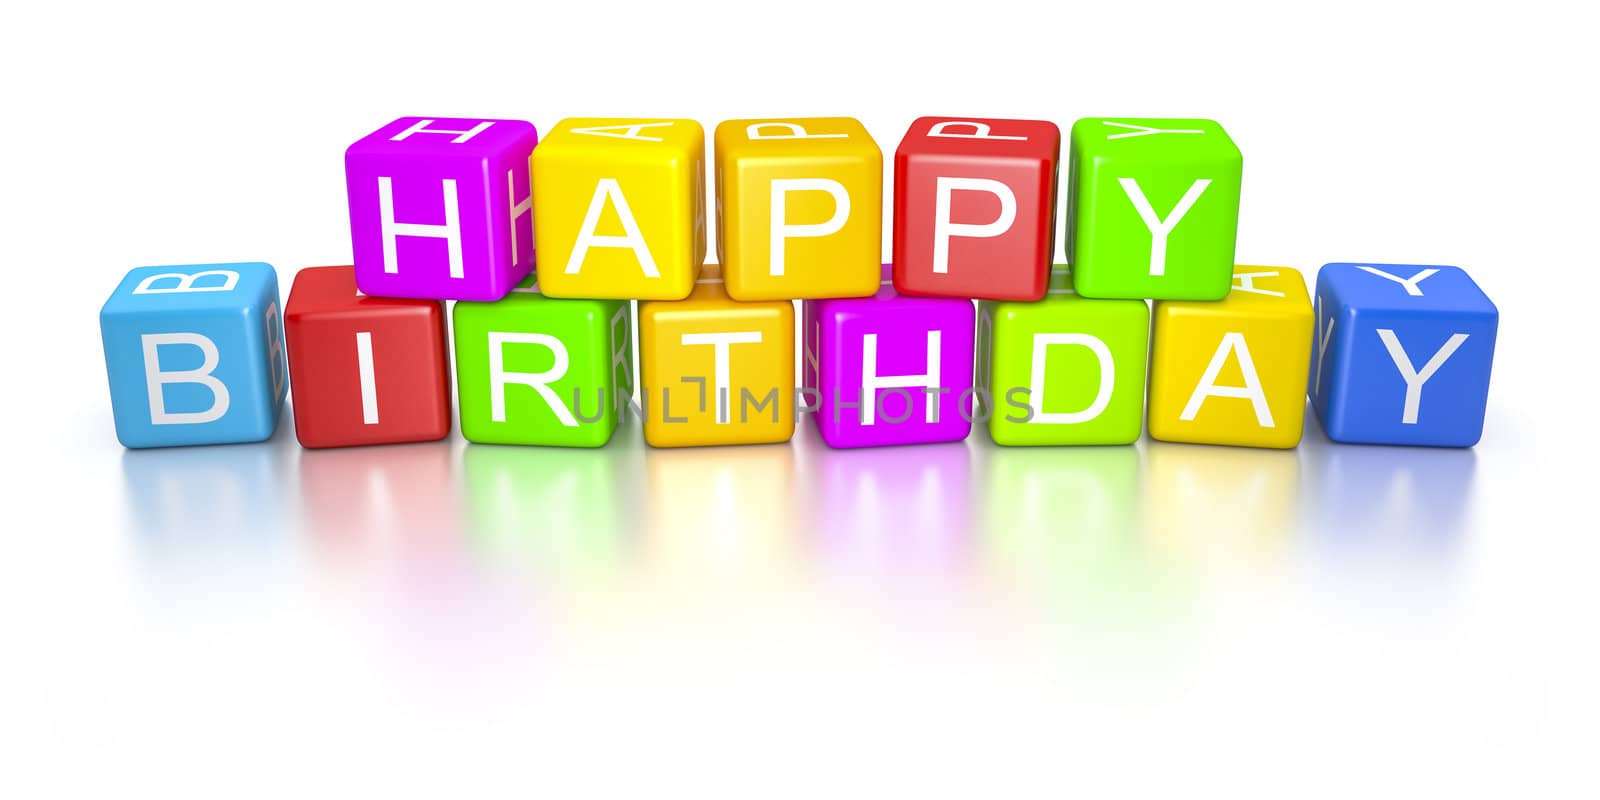 An image of colorful happy birthday dice